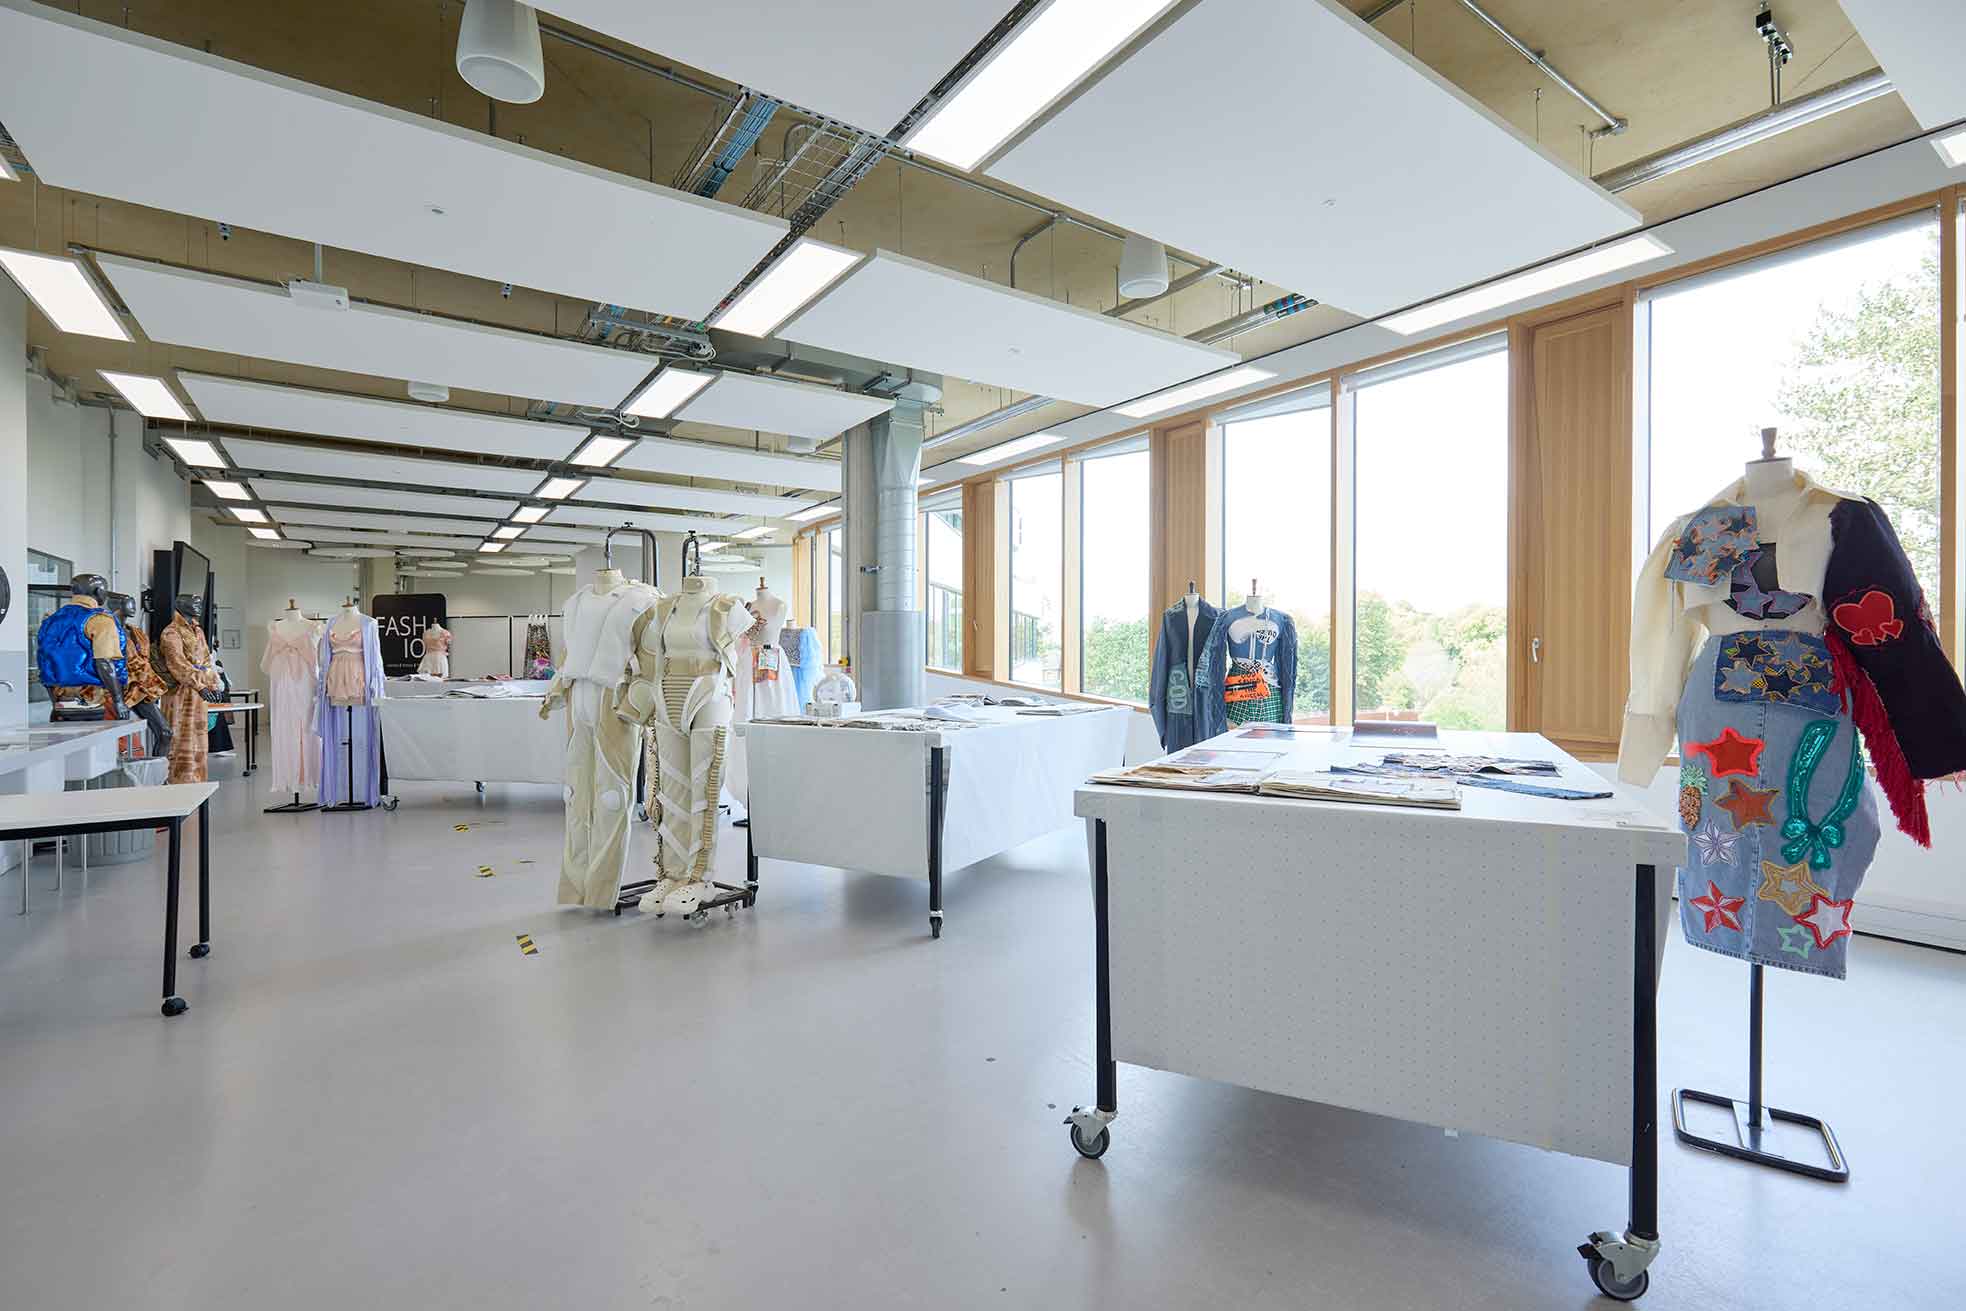 The photograph shows the Fashion studios with completed fashion designs displayed on mannequins